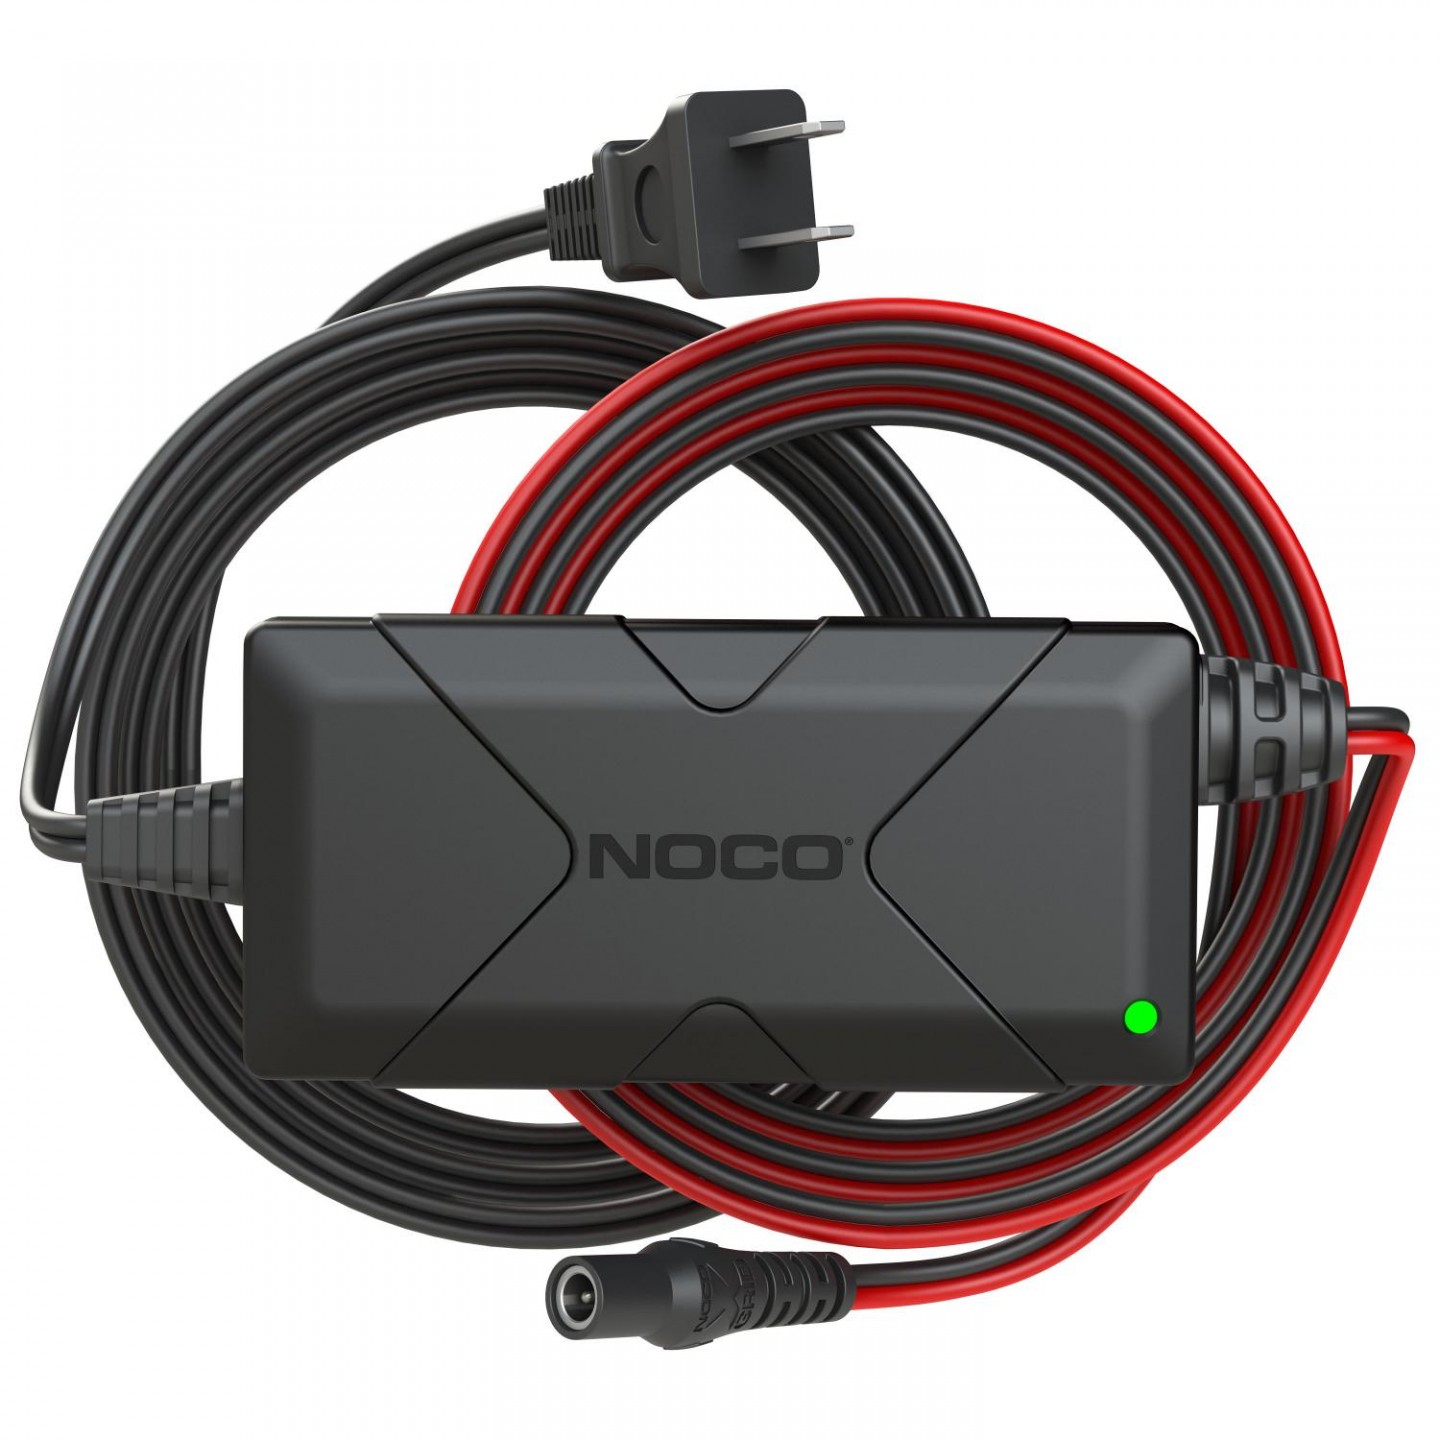 NOCO 56W XGC Power Adapter, XGC4 Questions & Answers